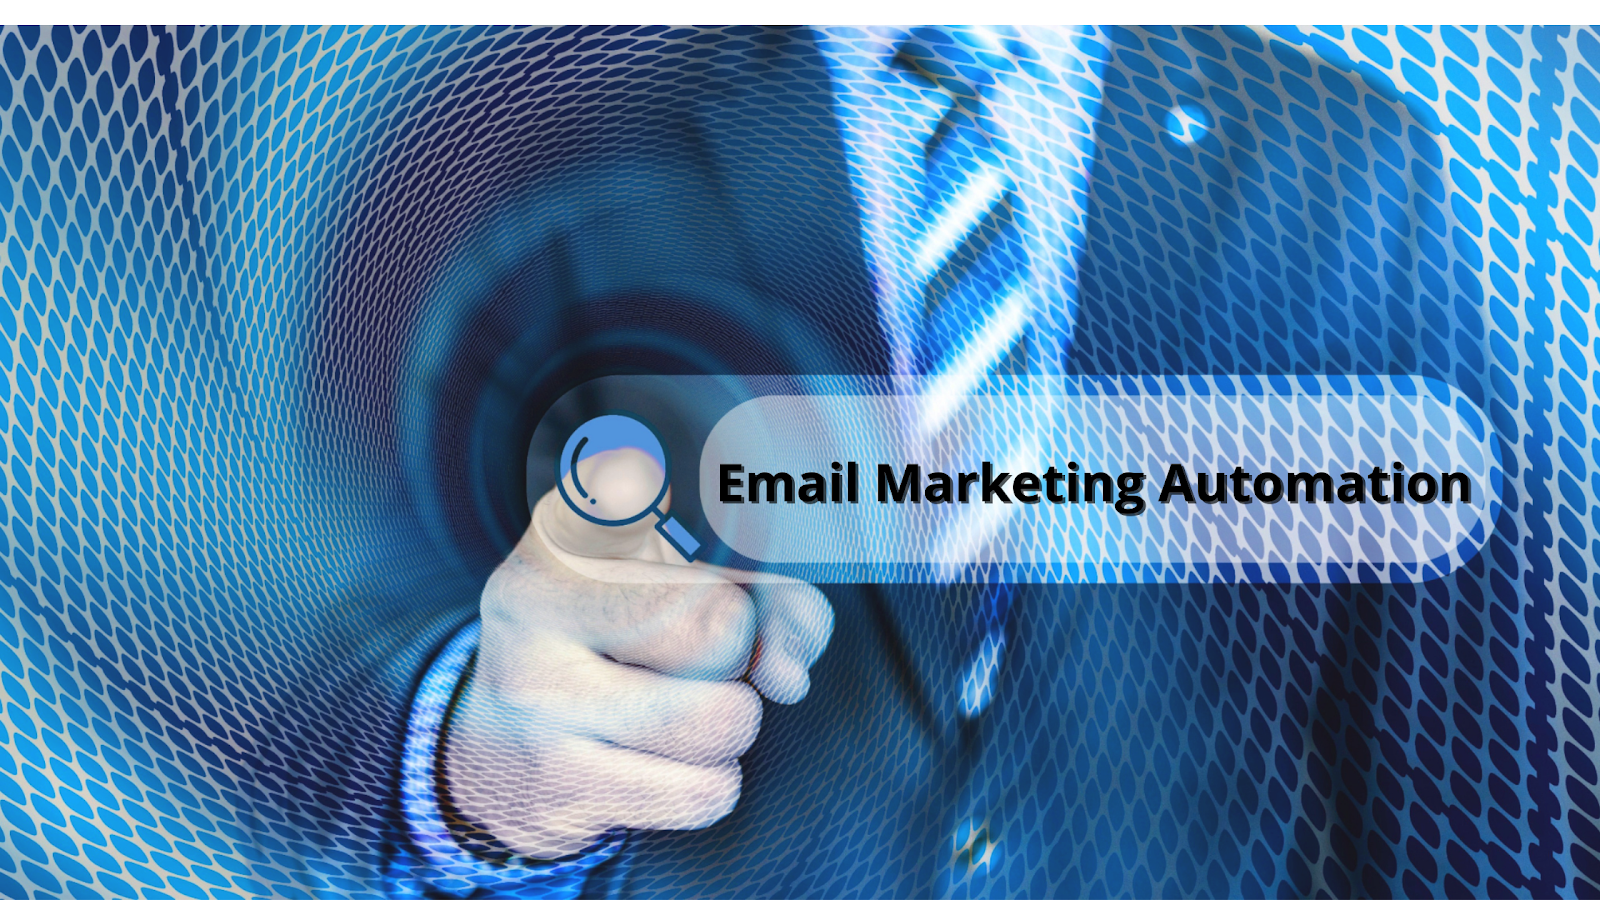 The second area that's the most in-demand is similar to emails, is through Email Marketing Automation.